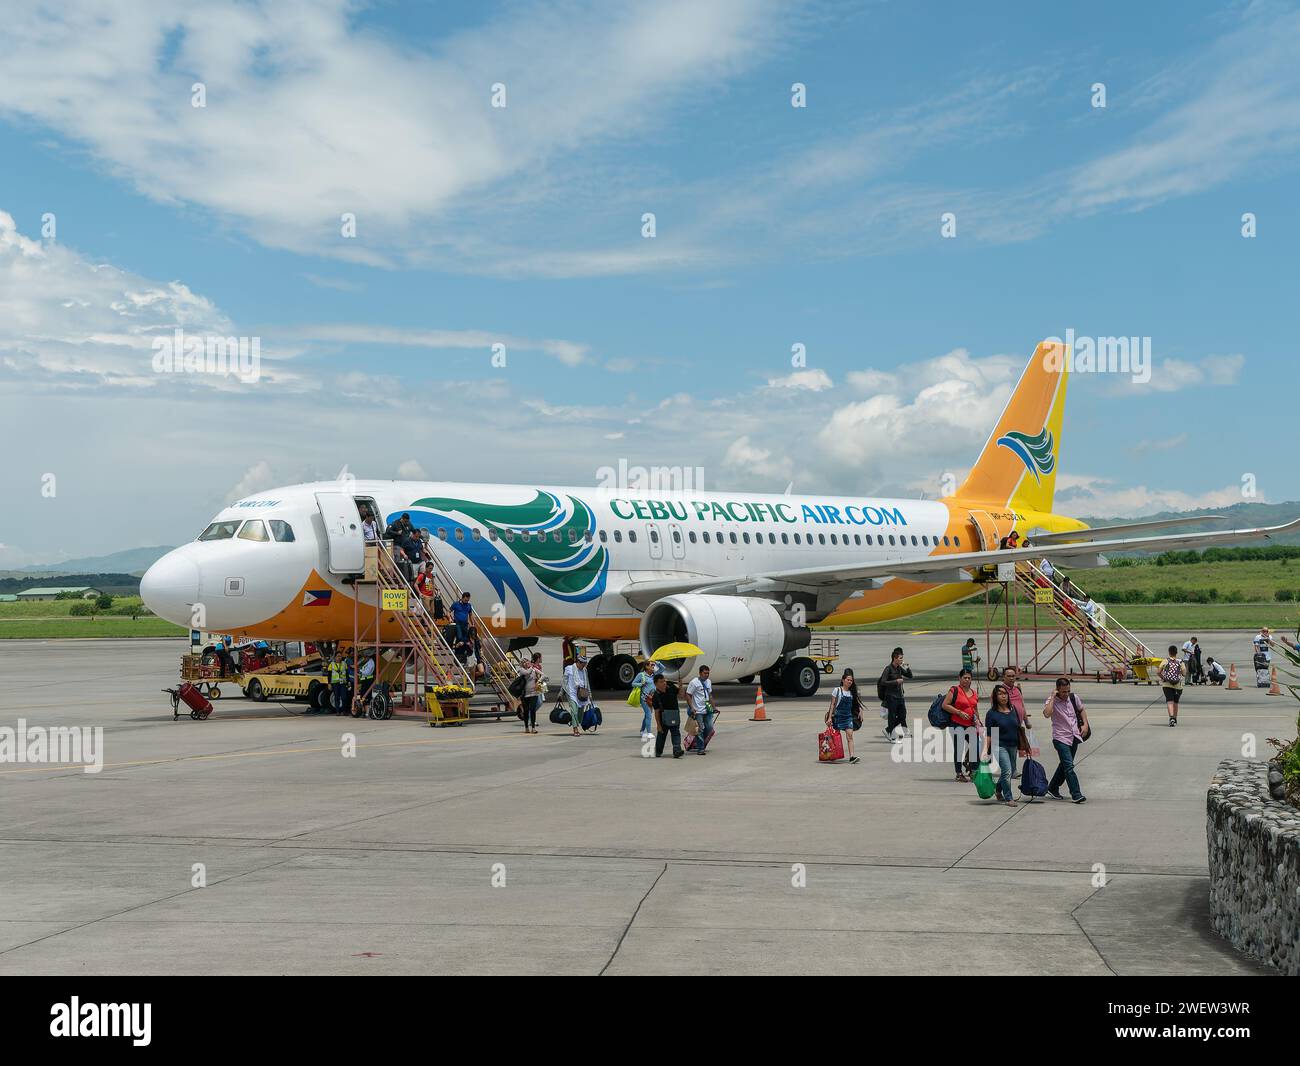 General Santos City, Philippines - July 8, 2017: Passengers disembarking from a Cebu Pacific Airbus A320 NEO at General Santos International Airport o Stock Photo